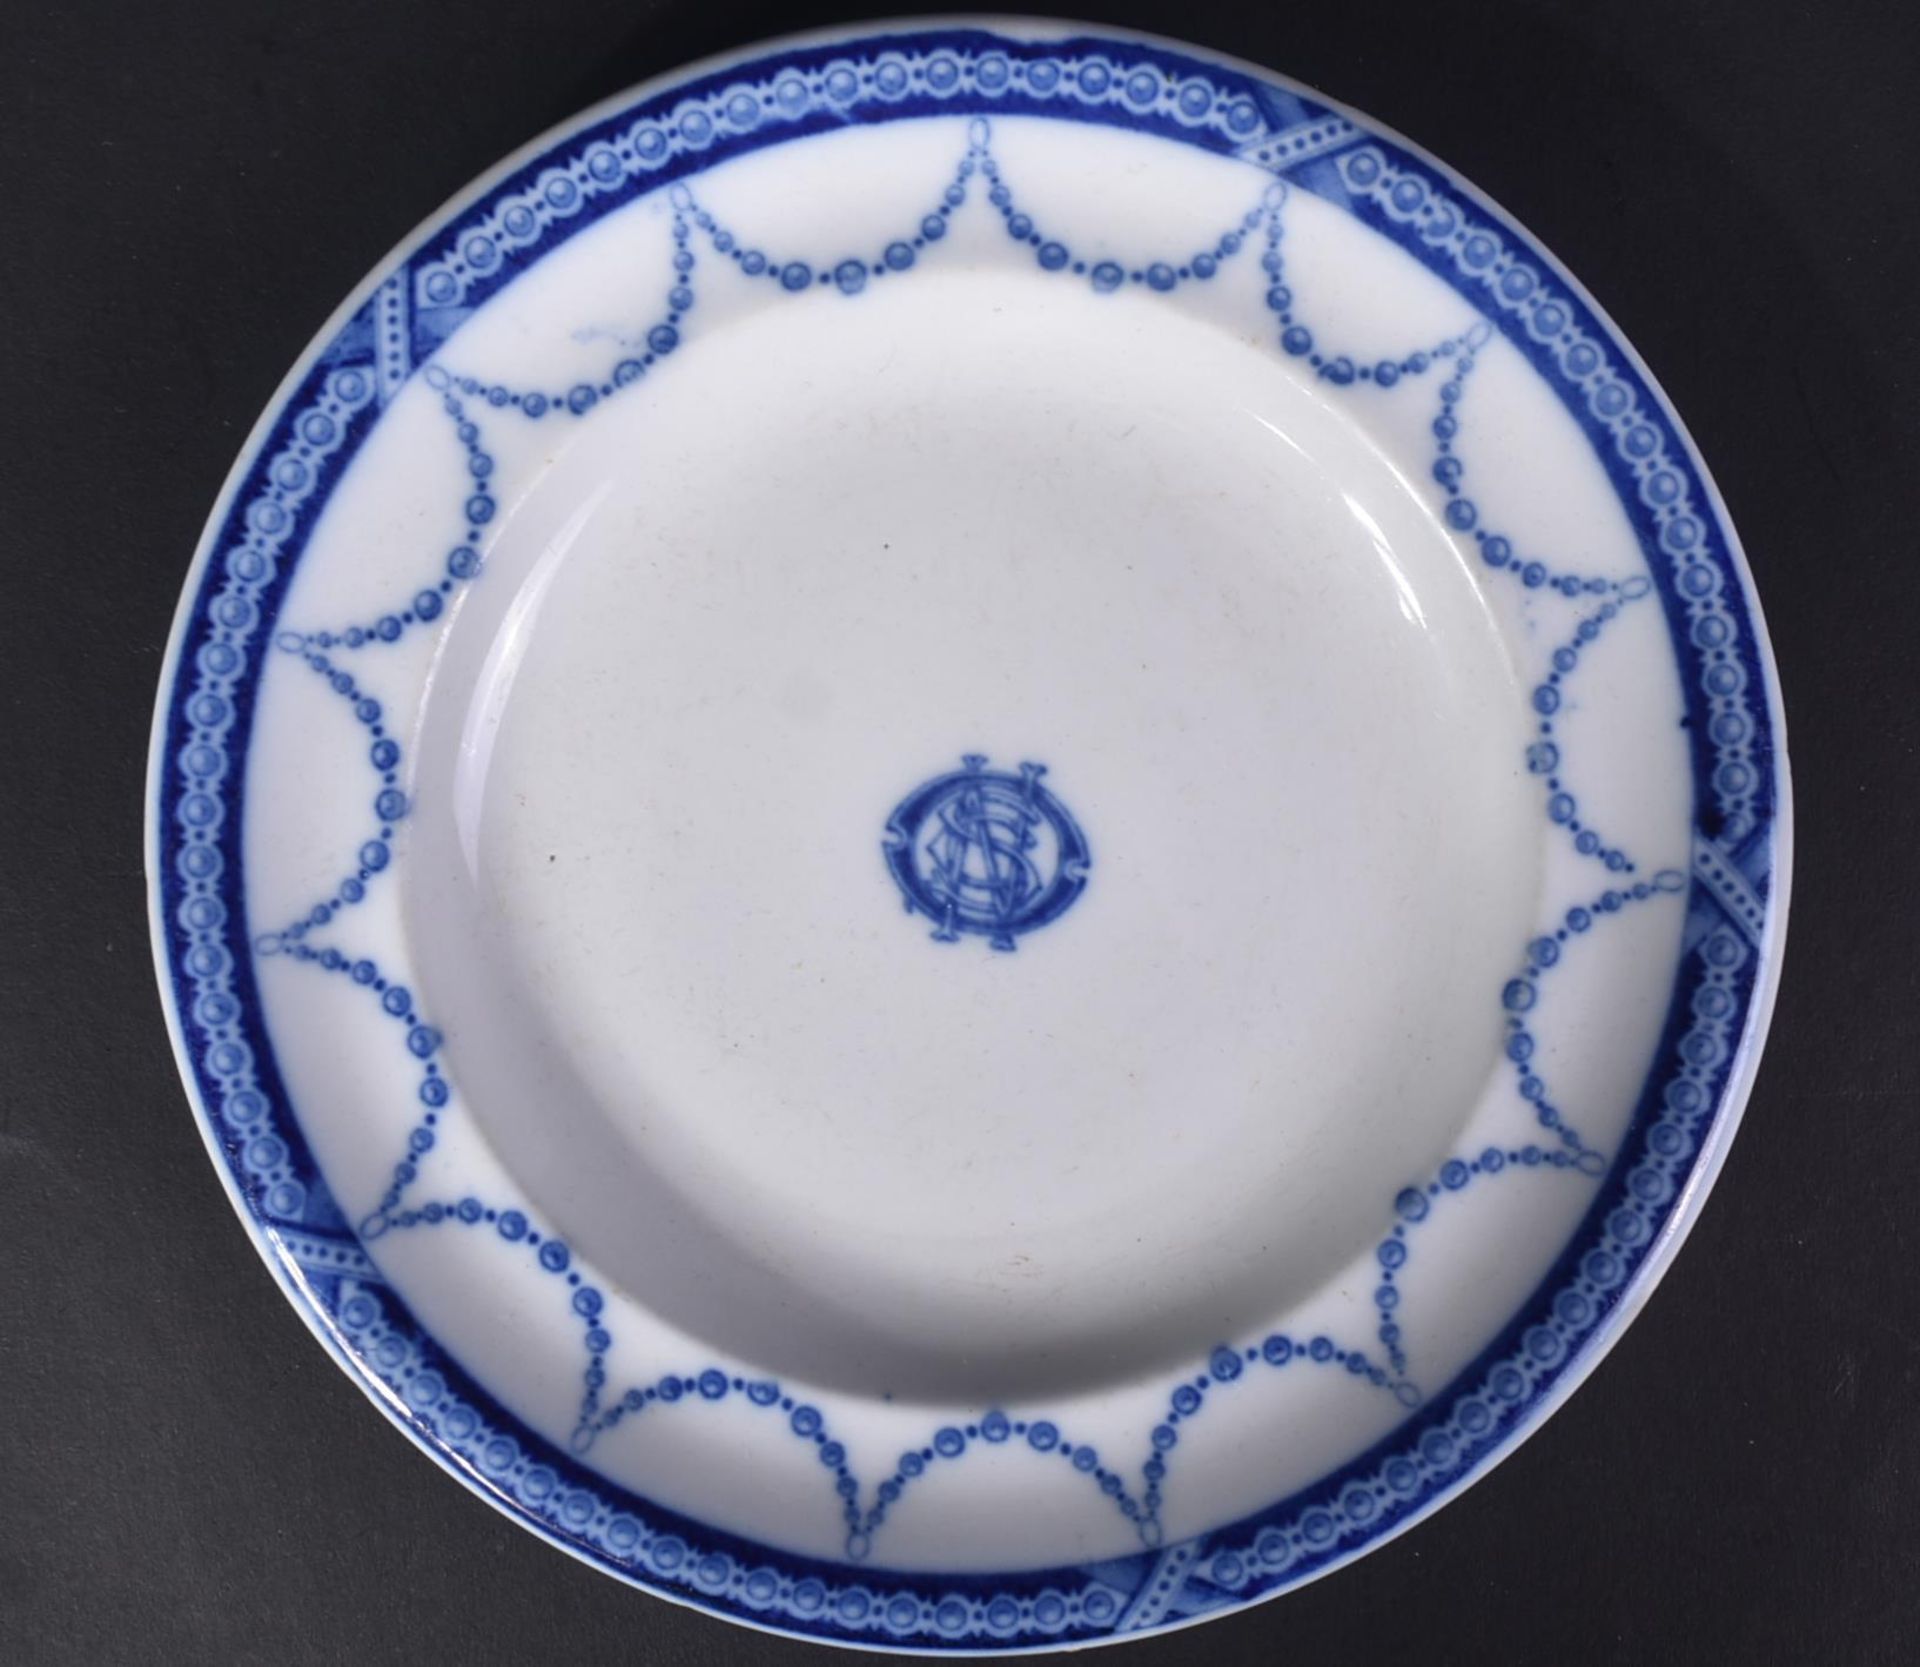 WHITE STAR LINE - EARLY STONIER & CO BLUE & WHITE PLATE